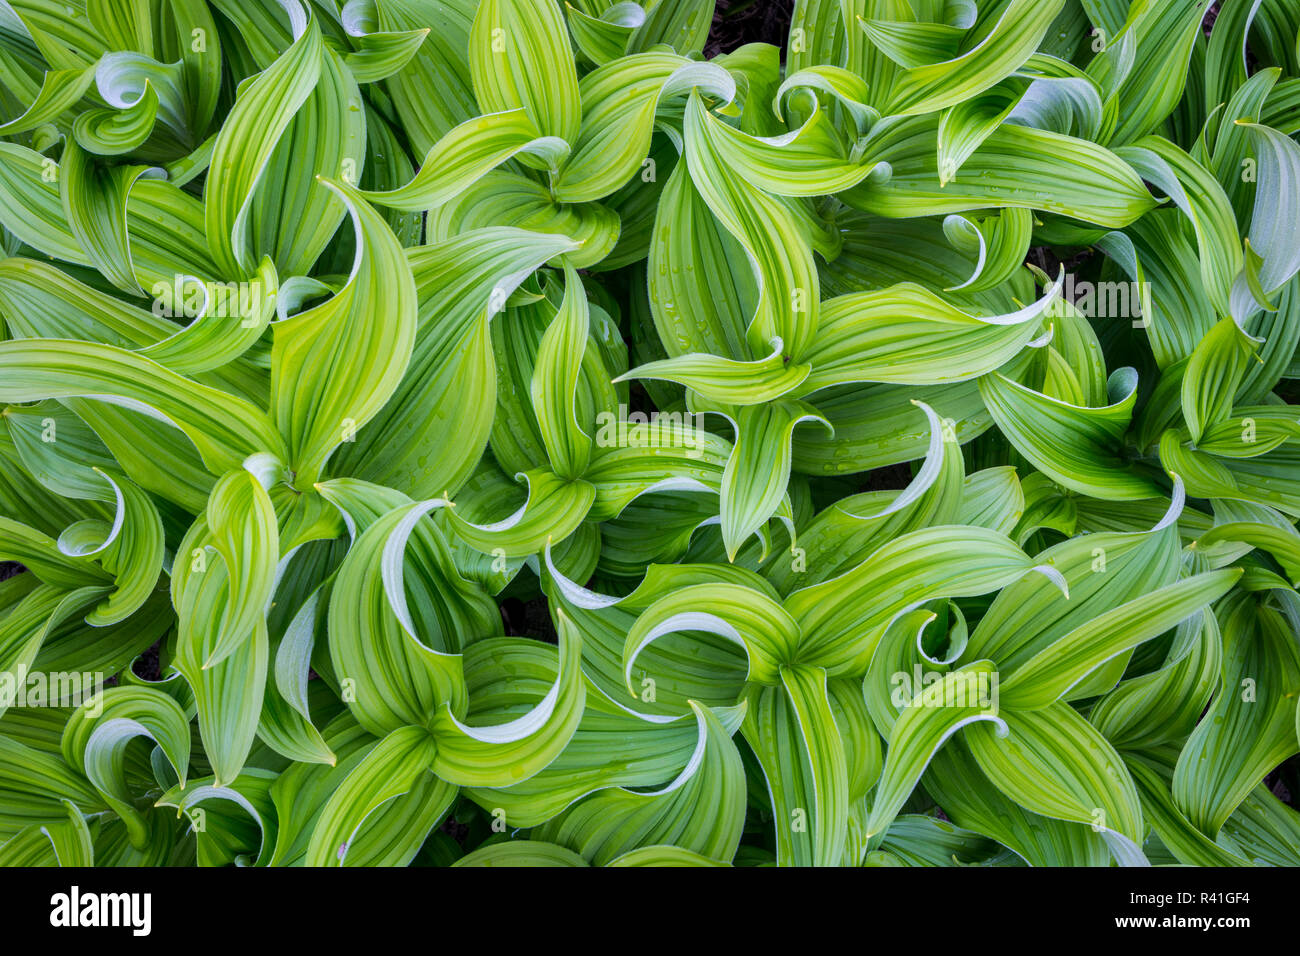 USA, Washington State. False Hellebore (Veratrum viride) leaves form a swirling pattern in the Cascade mountains of the Pacific Northwest. Stock Photo